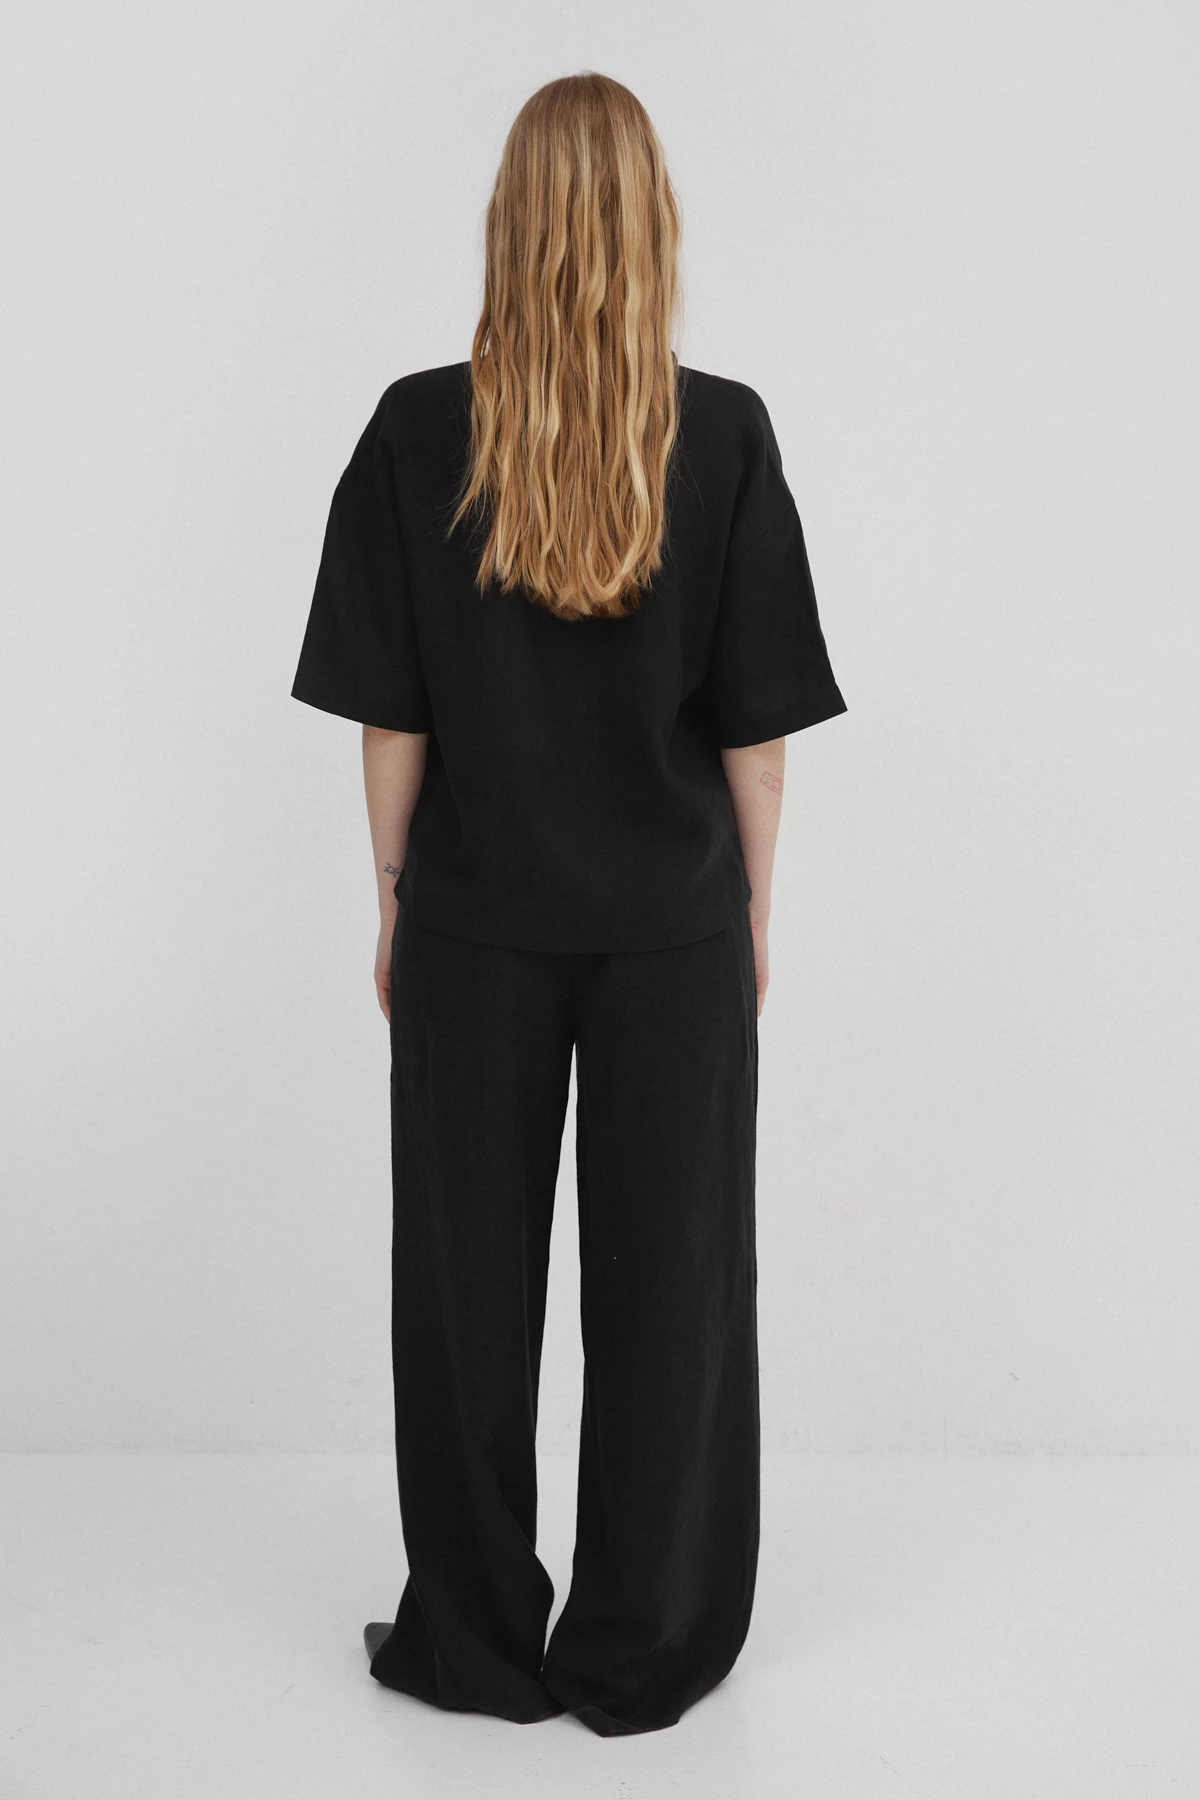 Black shirt with short sleeves made of linen, photo 4